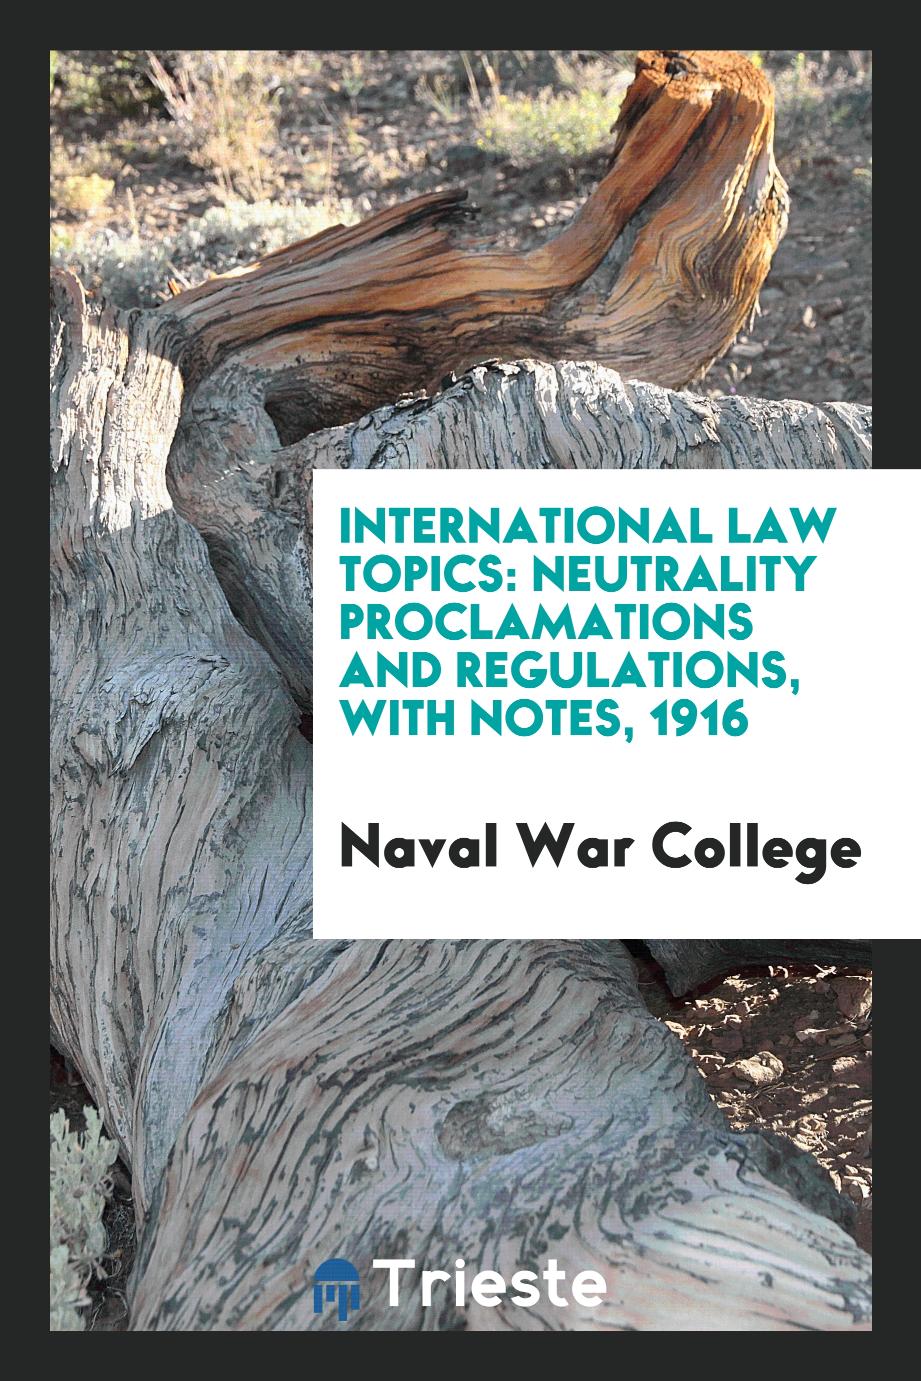 International Law Topics: Neutrality Proclamations and Regulations, with Notes, 1916